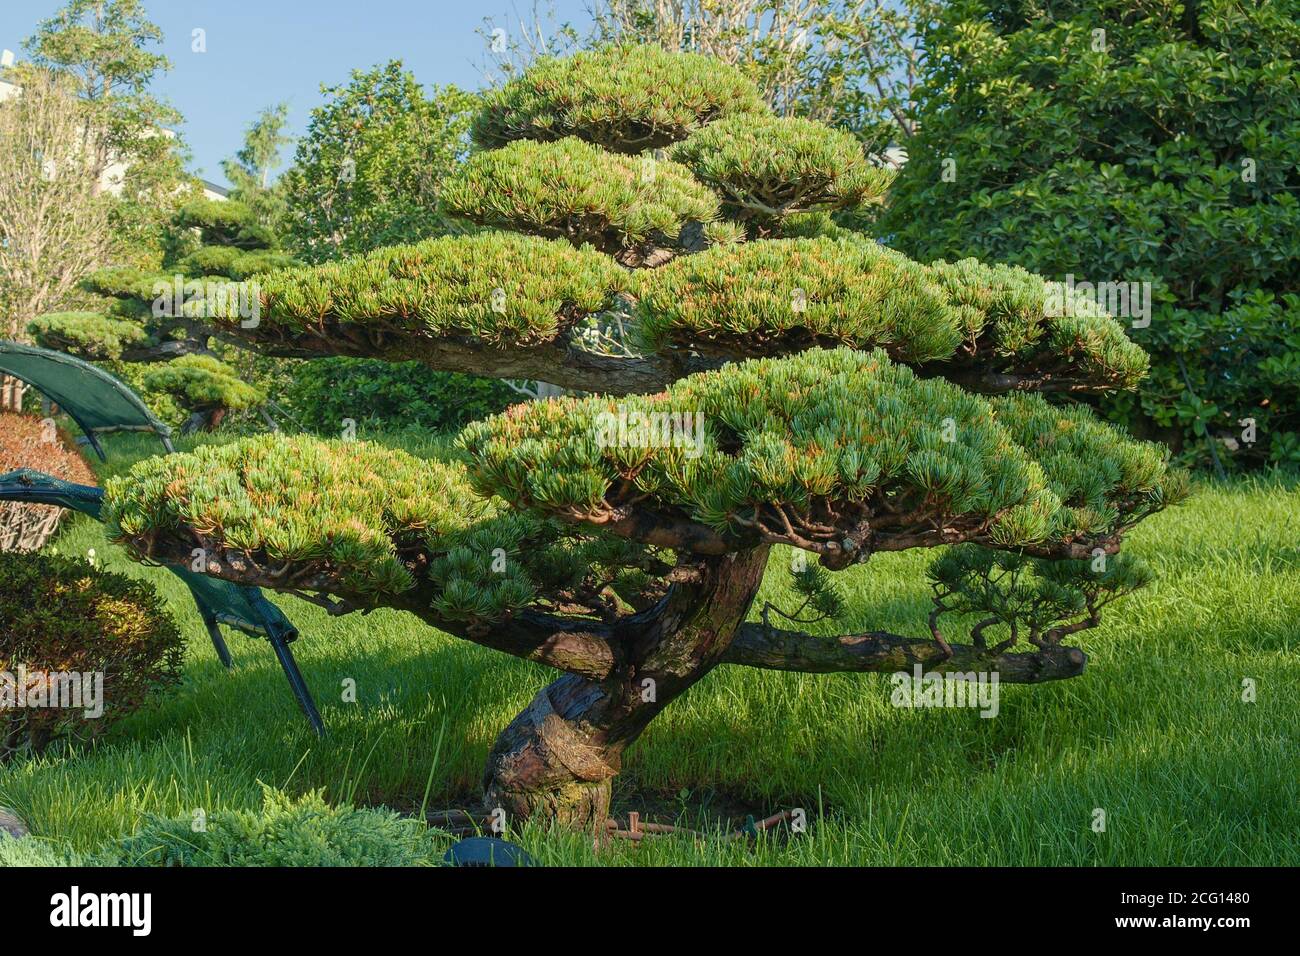 Unique shaping pine pruning technique or Niwaki for Japanese garden landscaping. Stock Photo